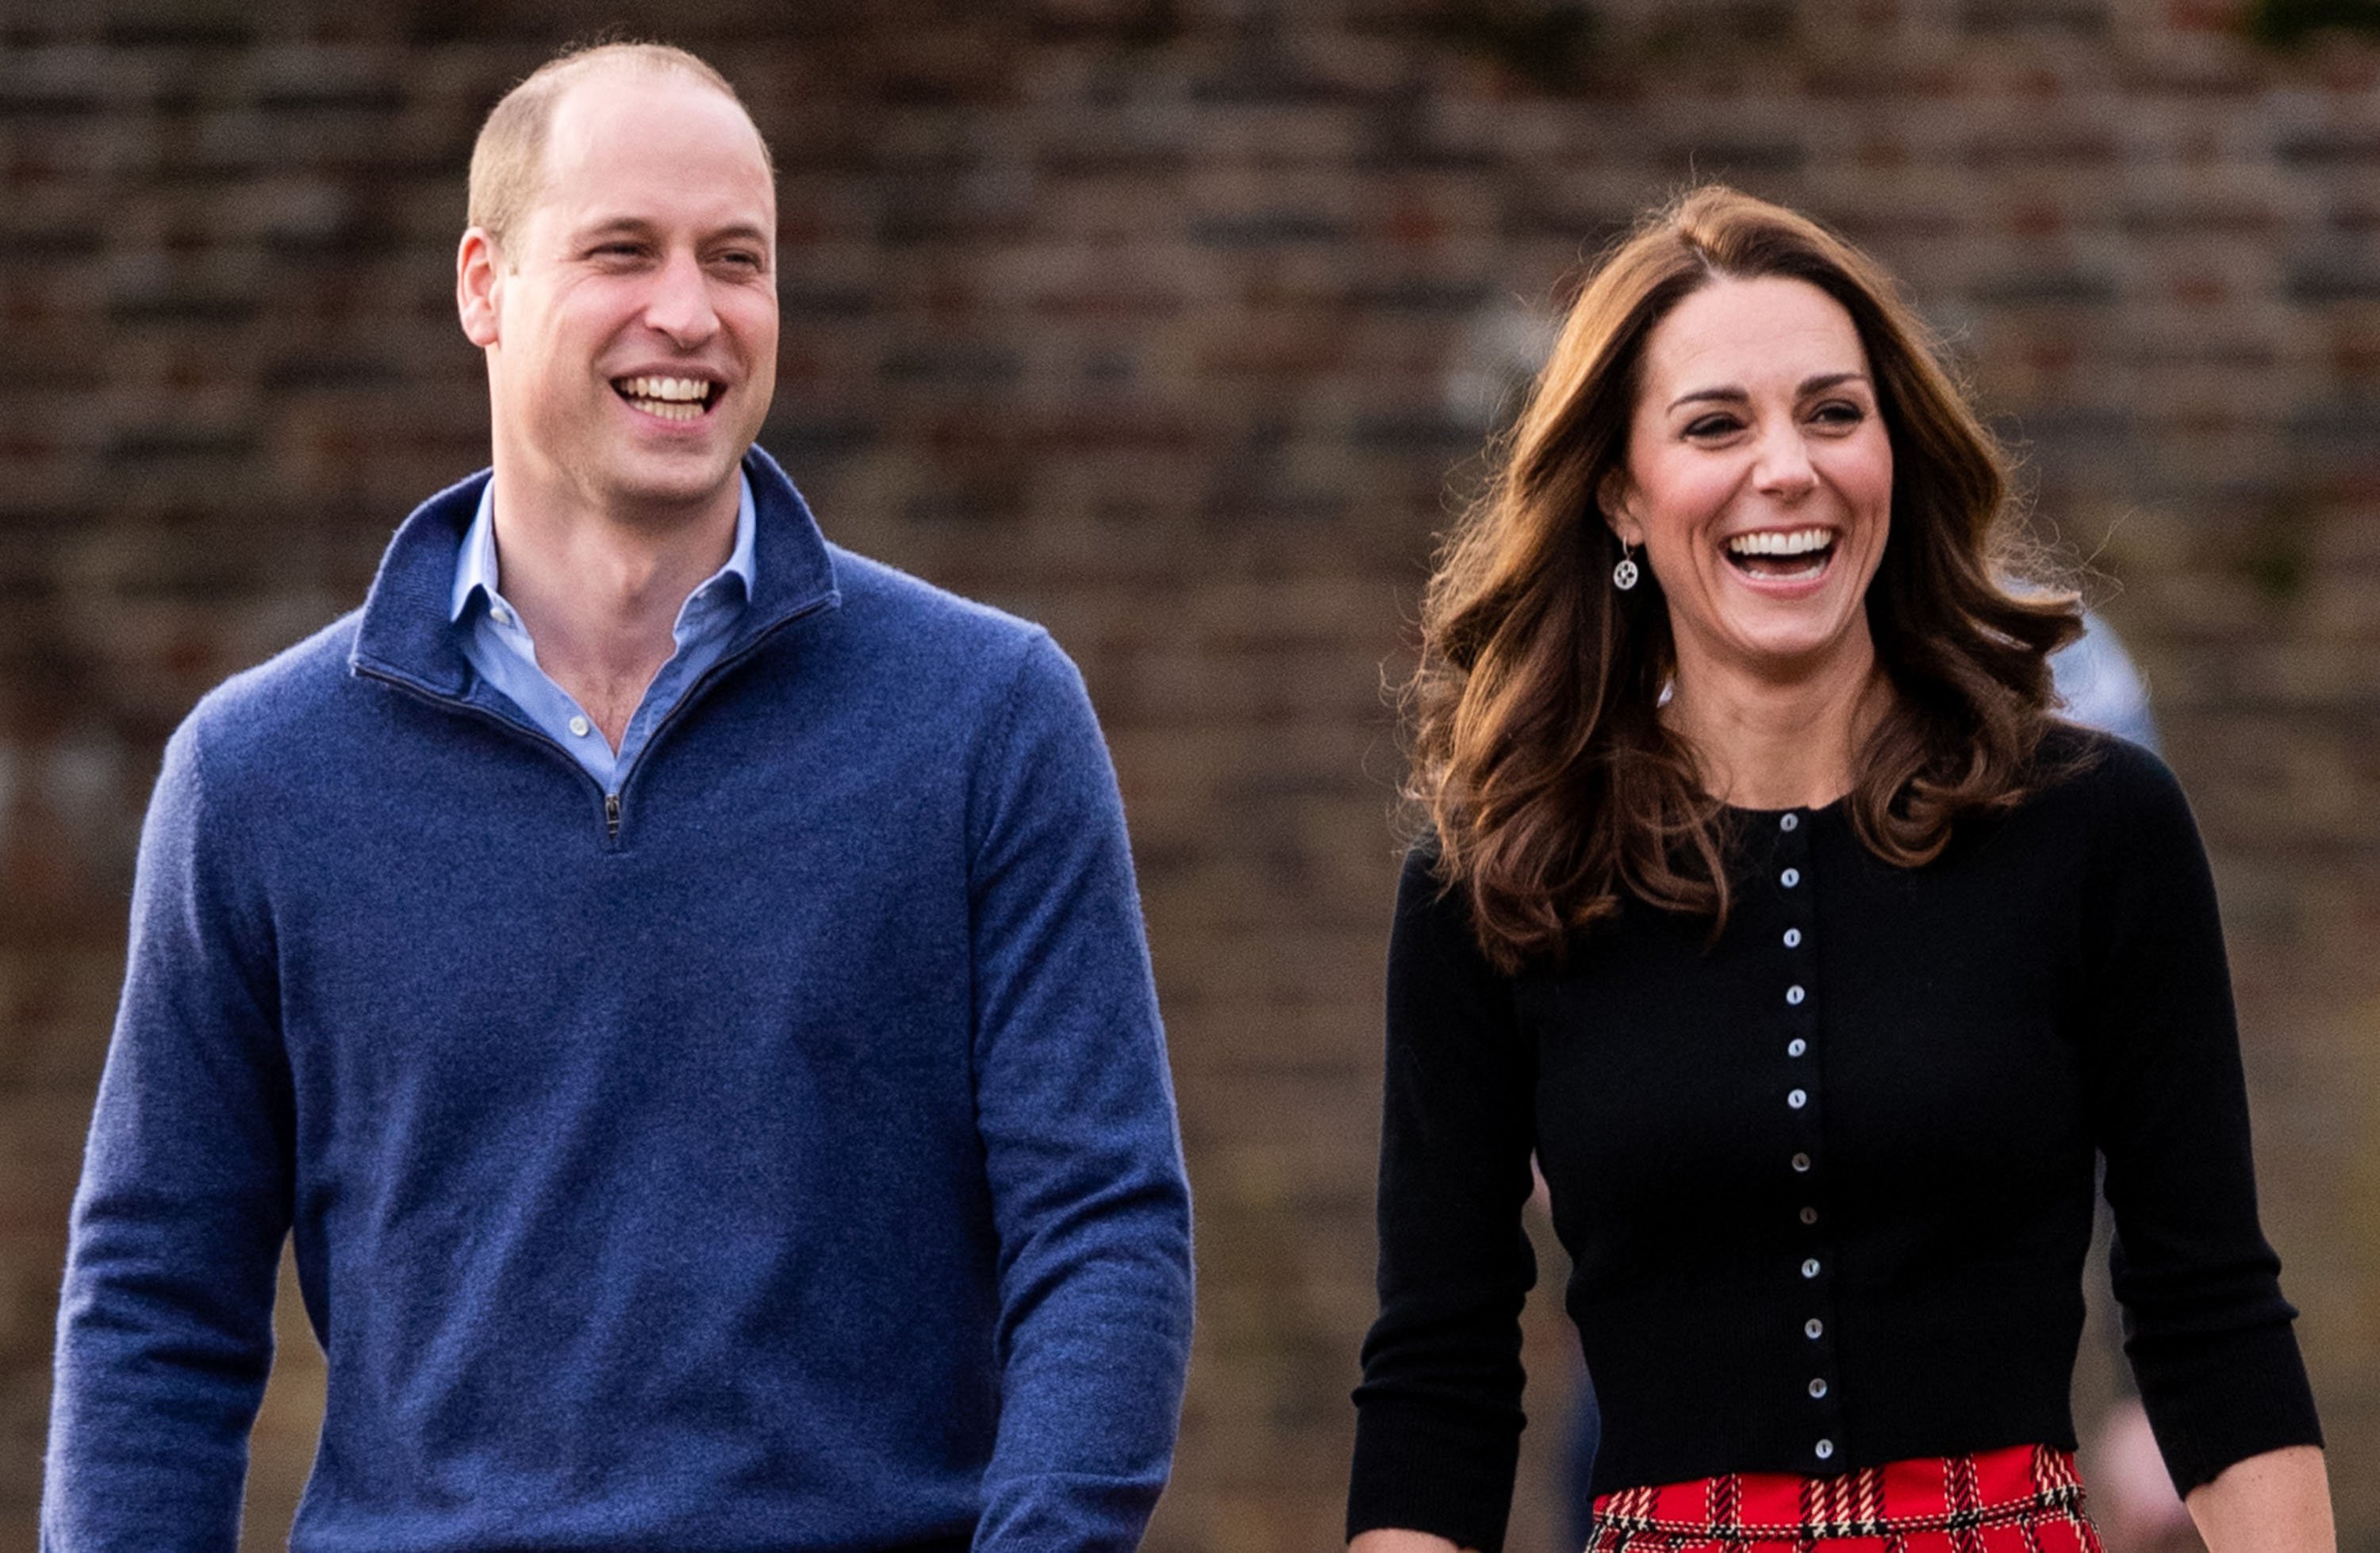 Kate Middleton and Prince William laugh together. The Prince and Princess of Wales show relaxed and happy body language.